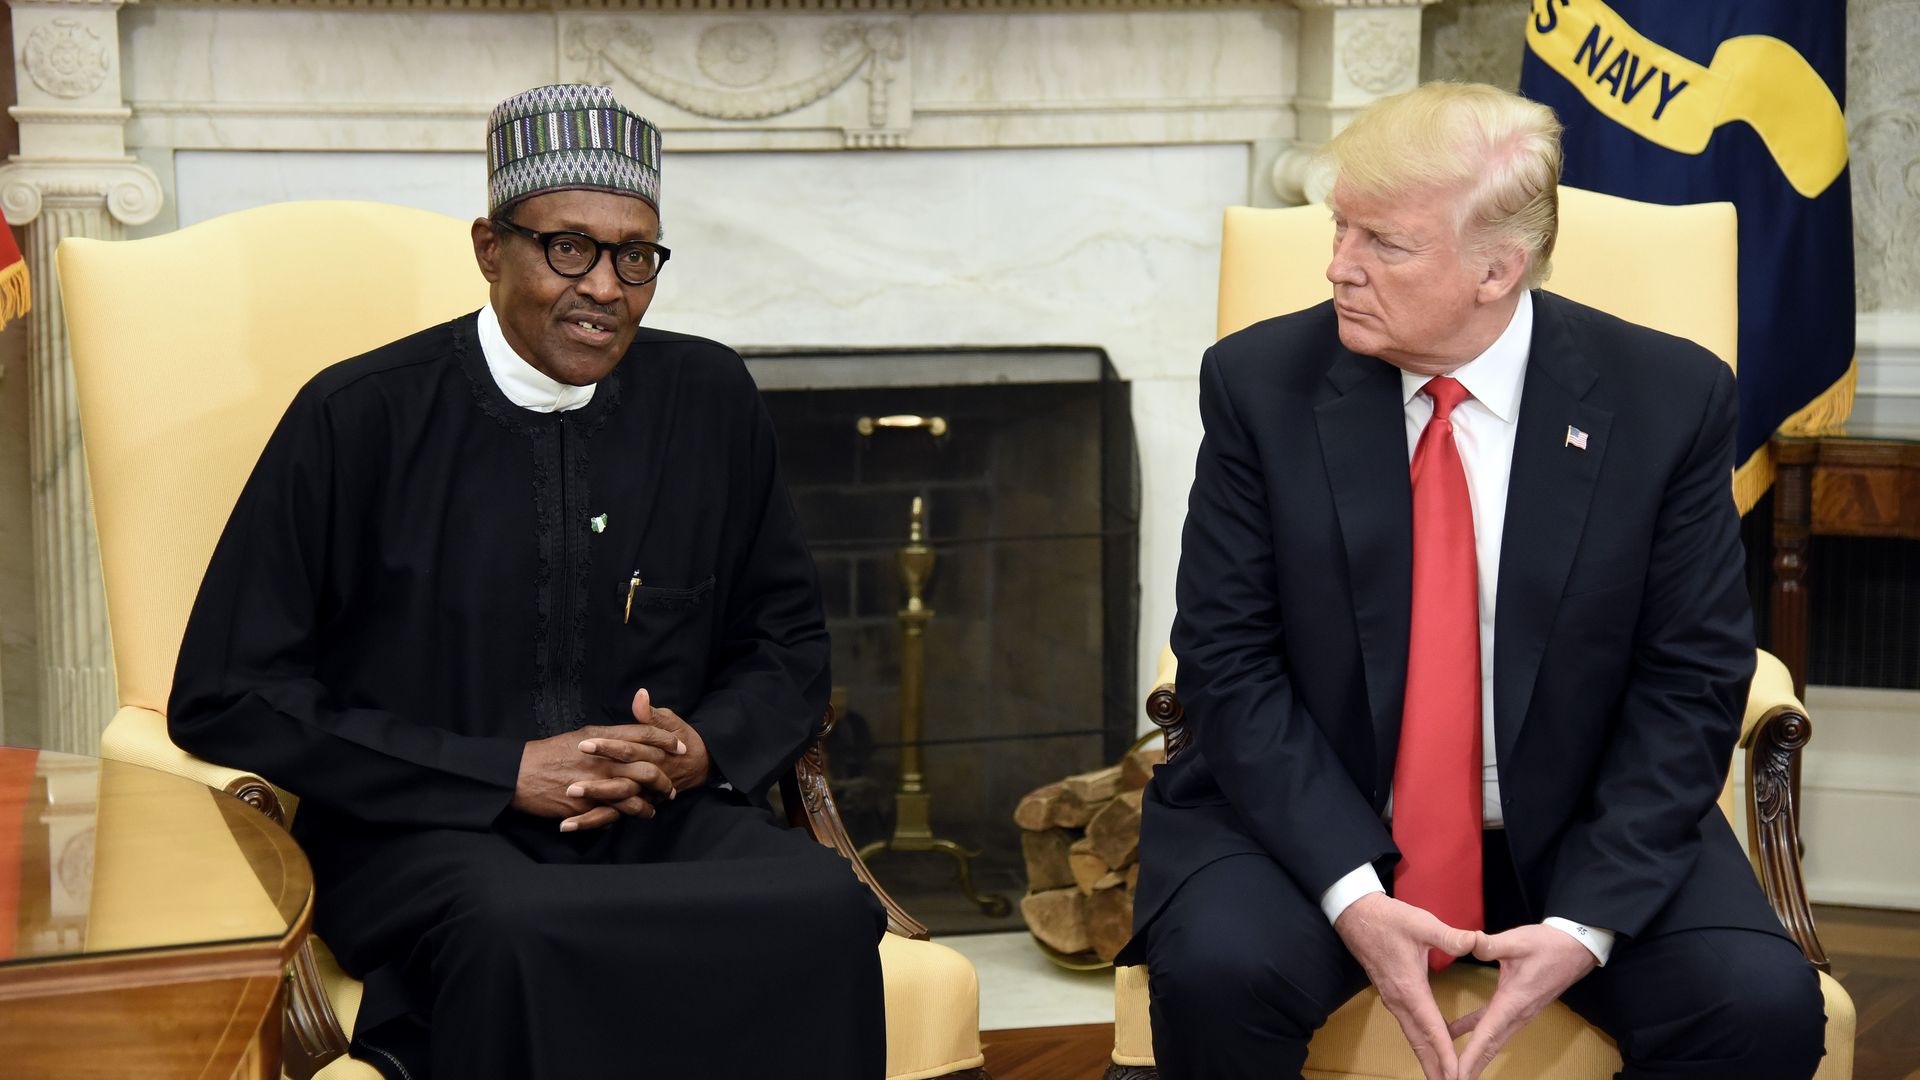 US President Donald Trump (R) meets with Nigerian President Muhammadu Buhari in the Oval Office of the White House on April 30, 2018